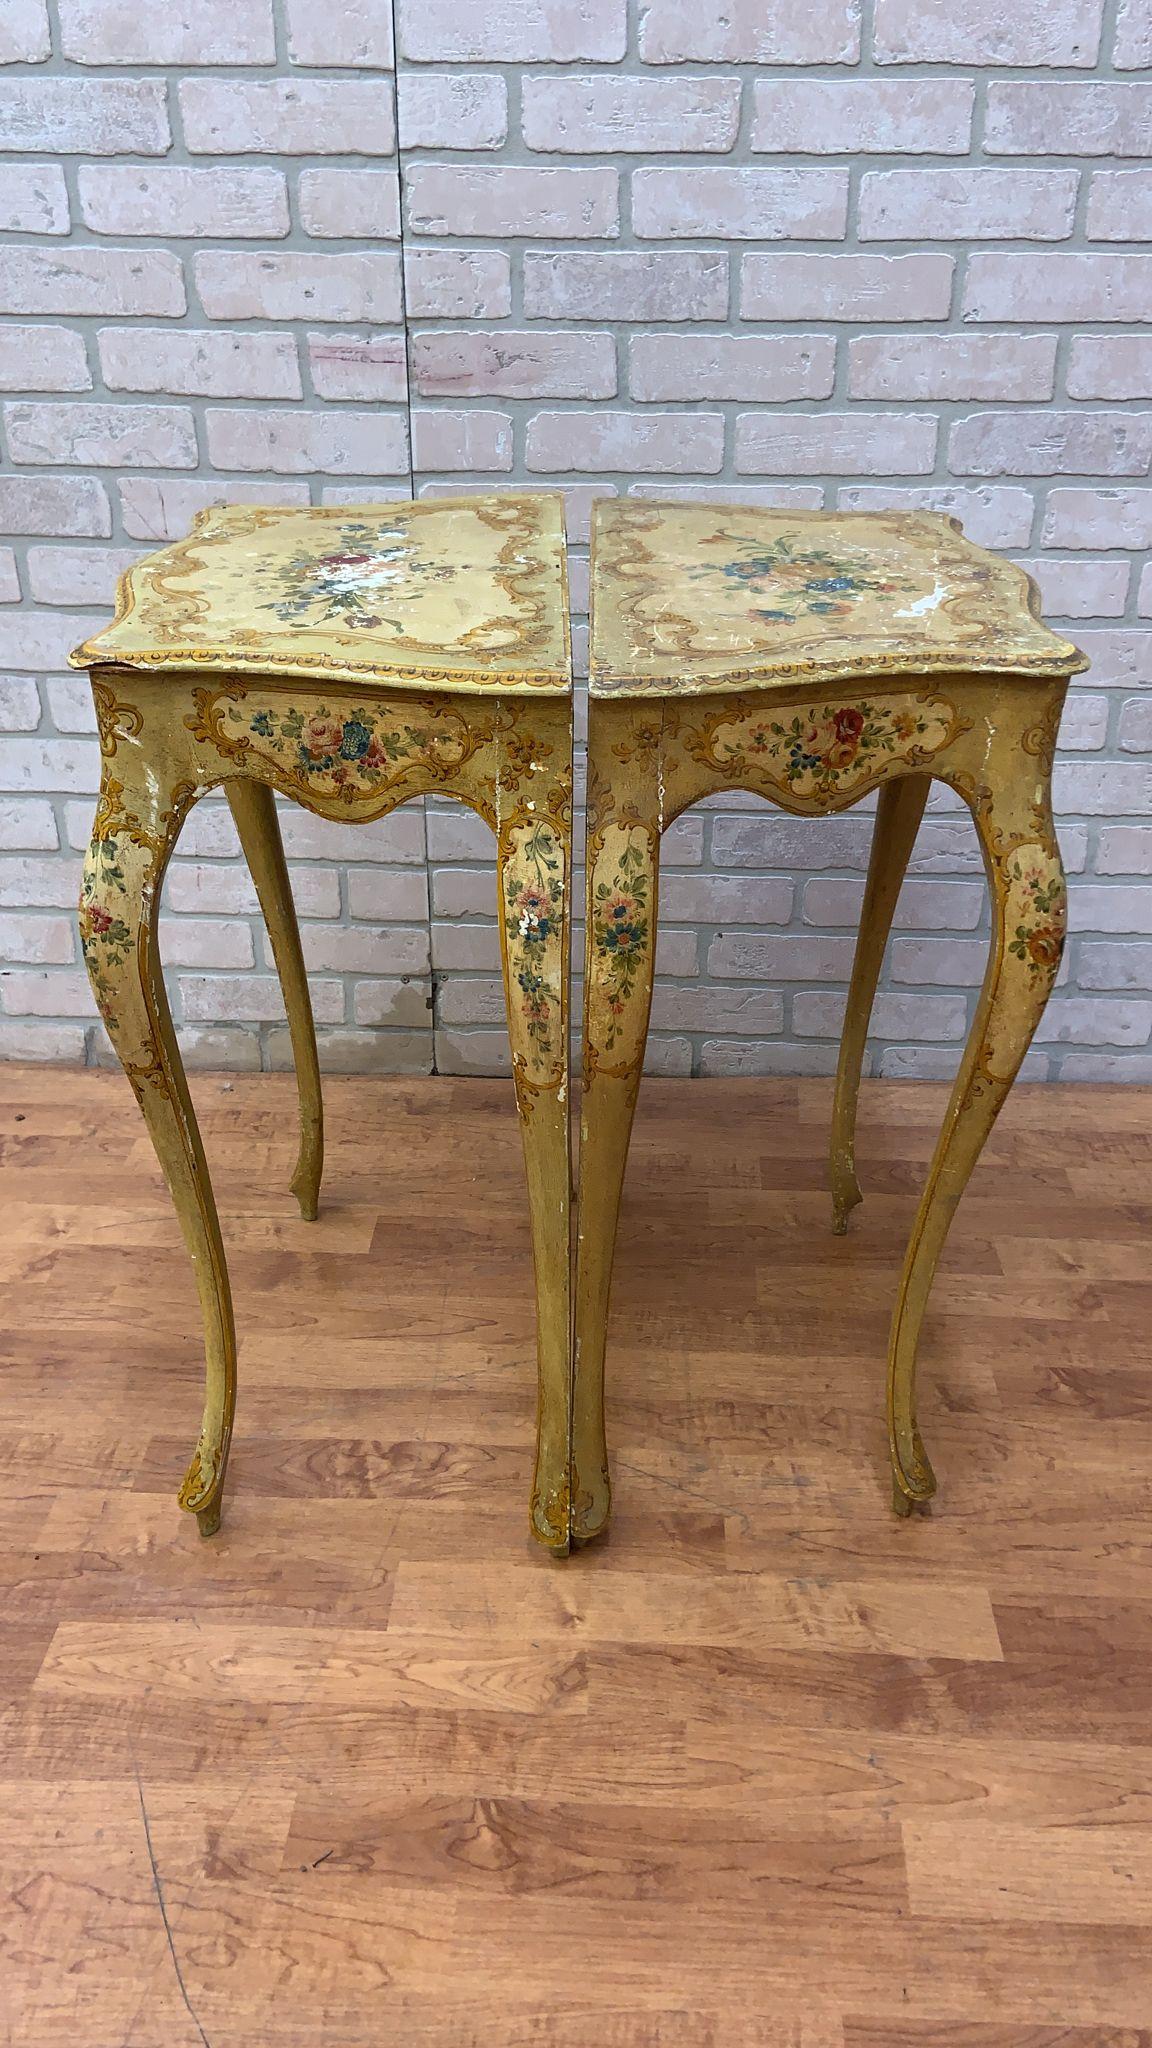 Antique Rococo Style Venetian Hand Painted Vanity Desk & Side Tables, Set of 3 For Sale 7